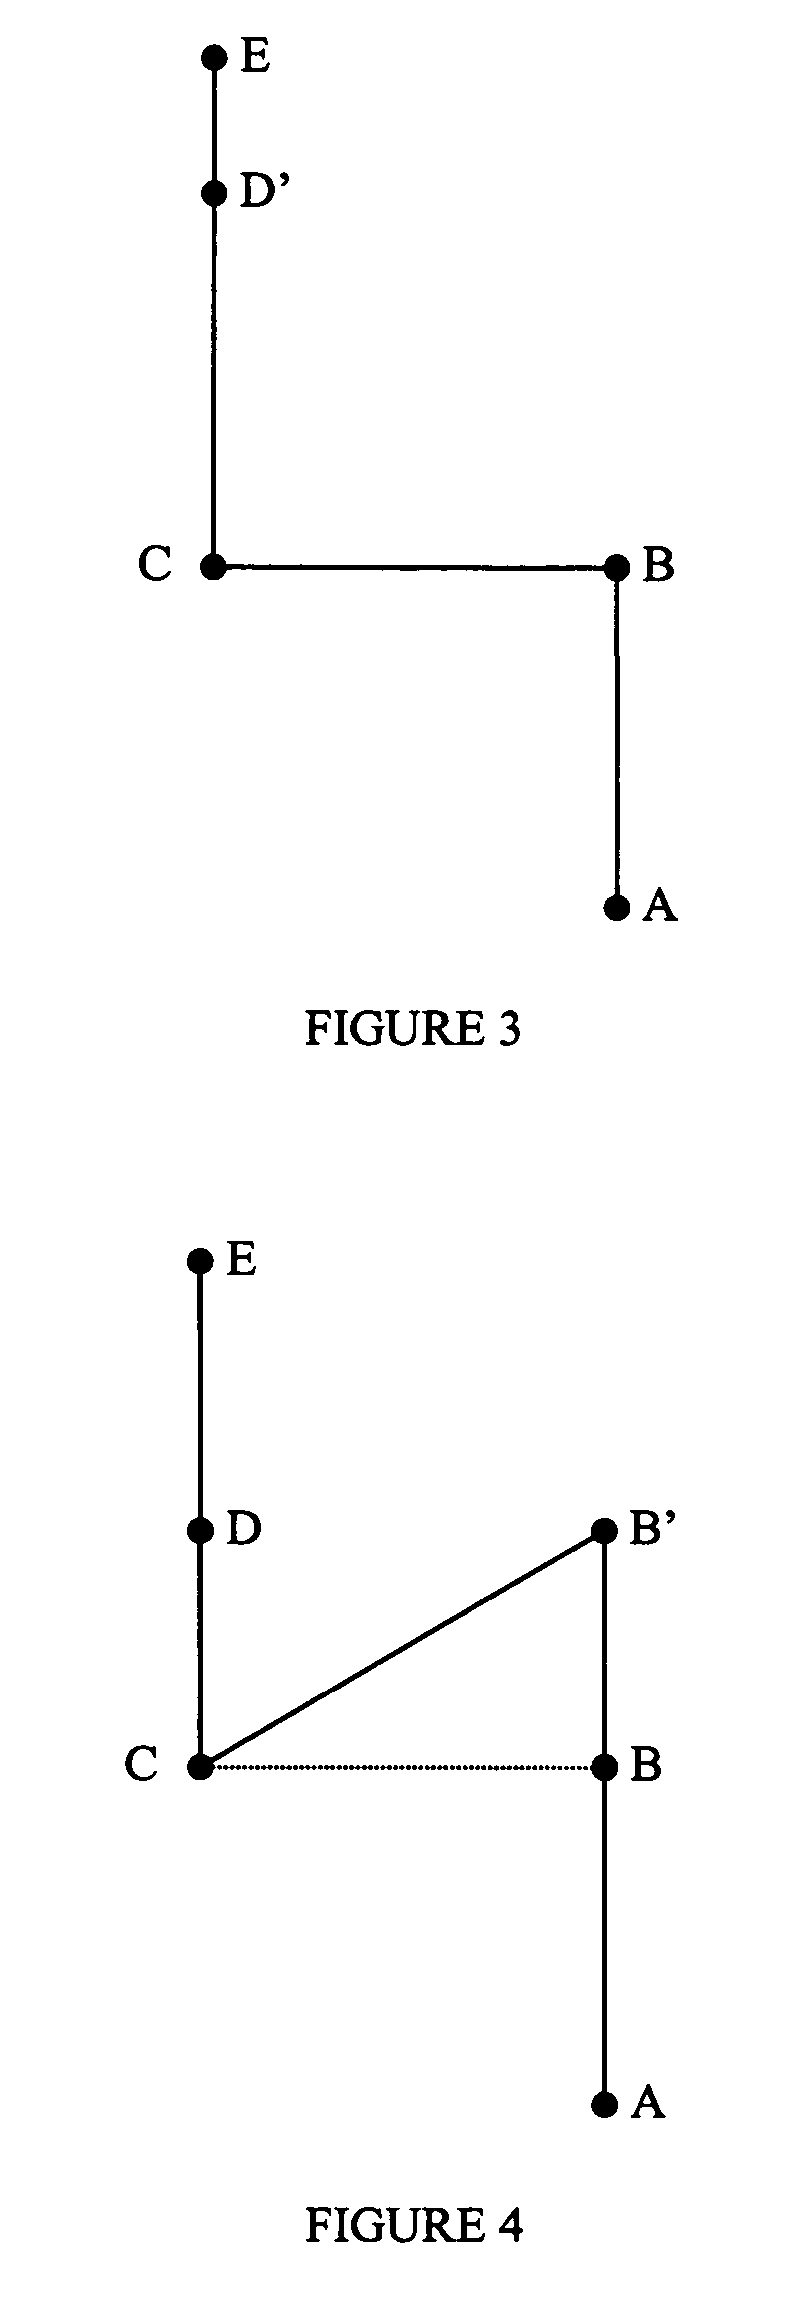 System and method of optimizing a fixed-route transit network